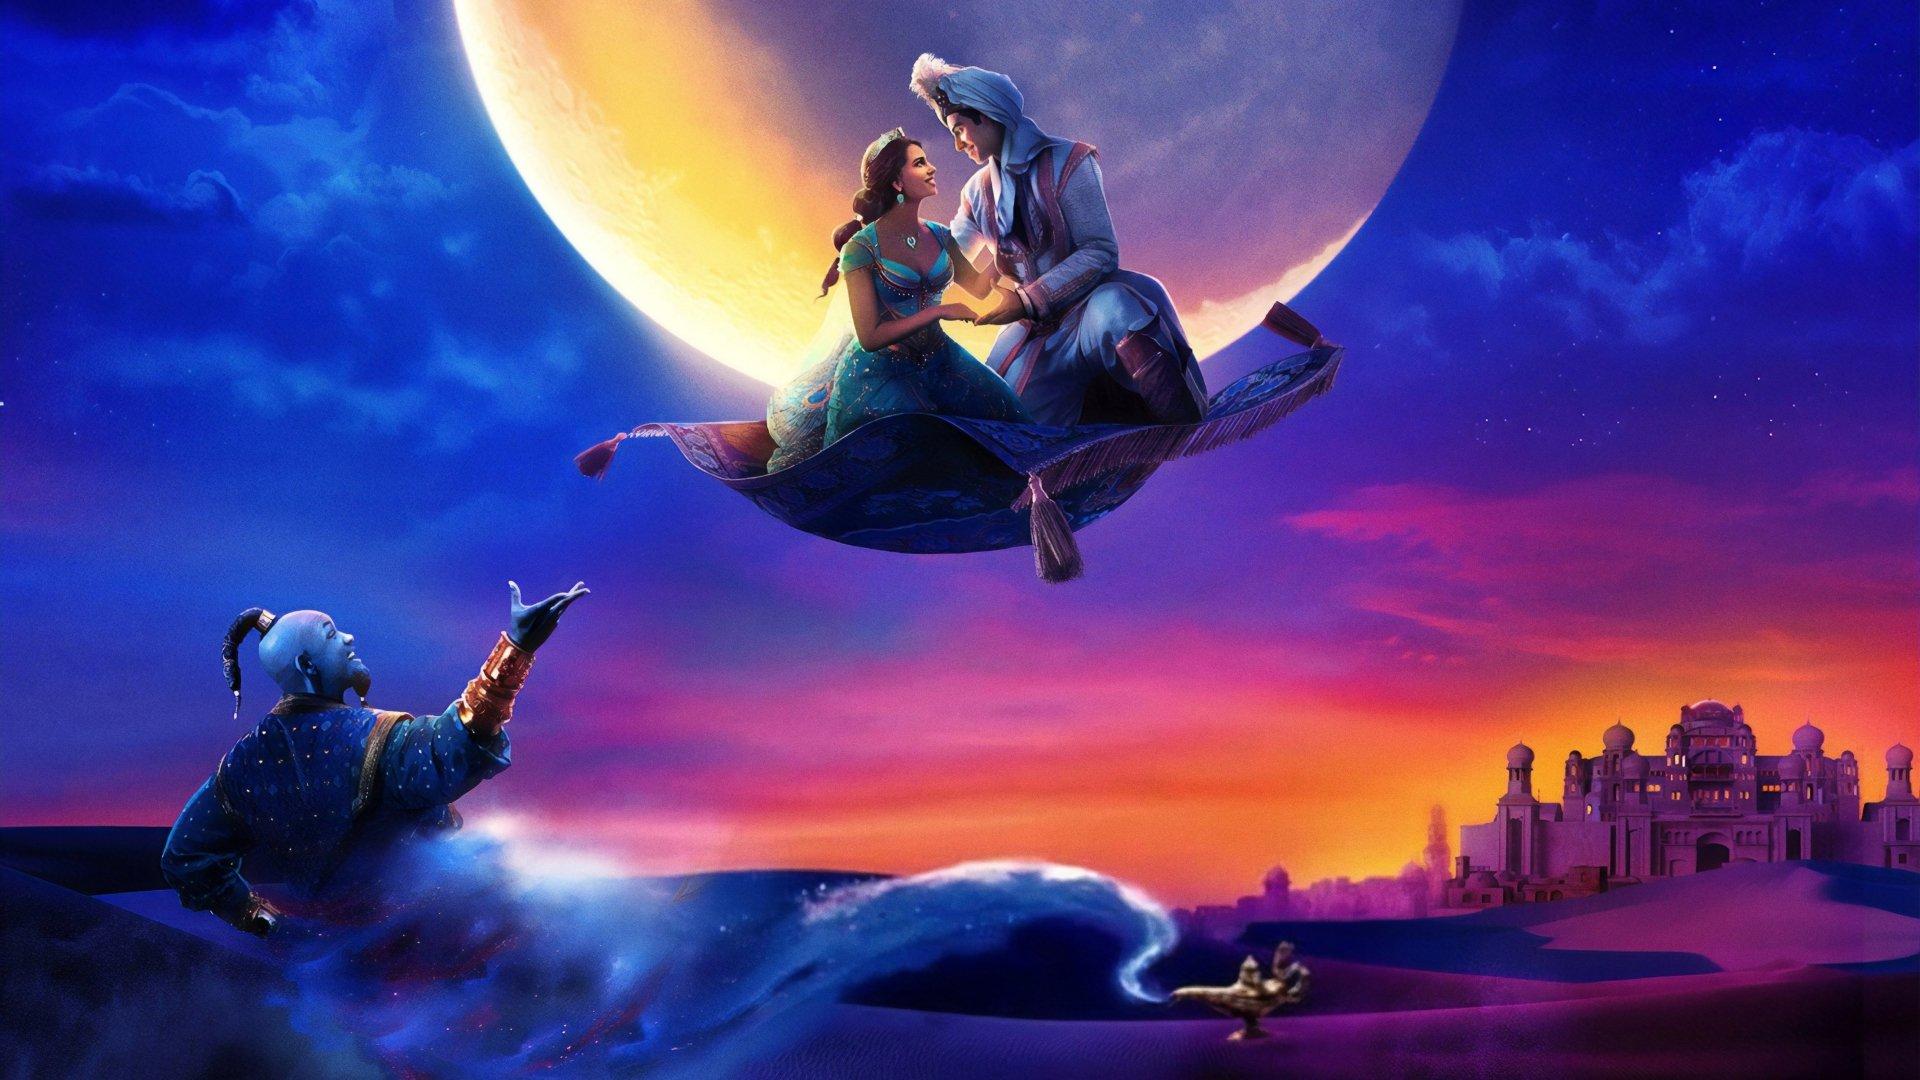 Aladdin (2019) HD Wallpaper and Background Image